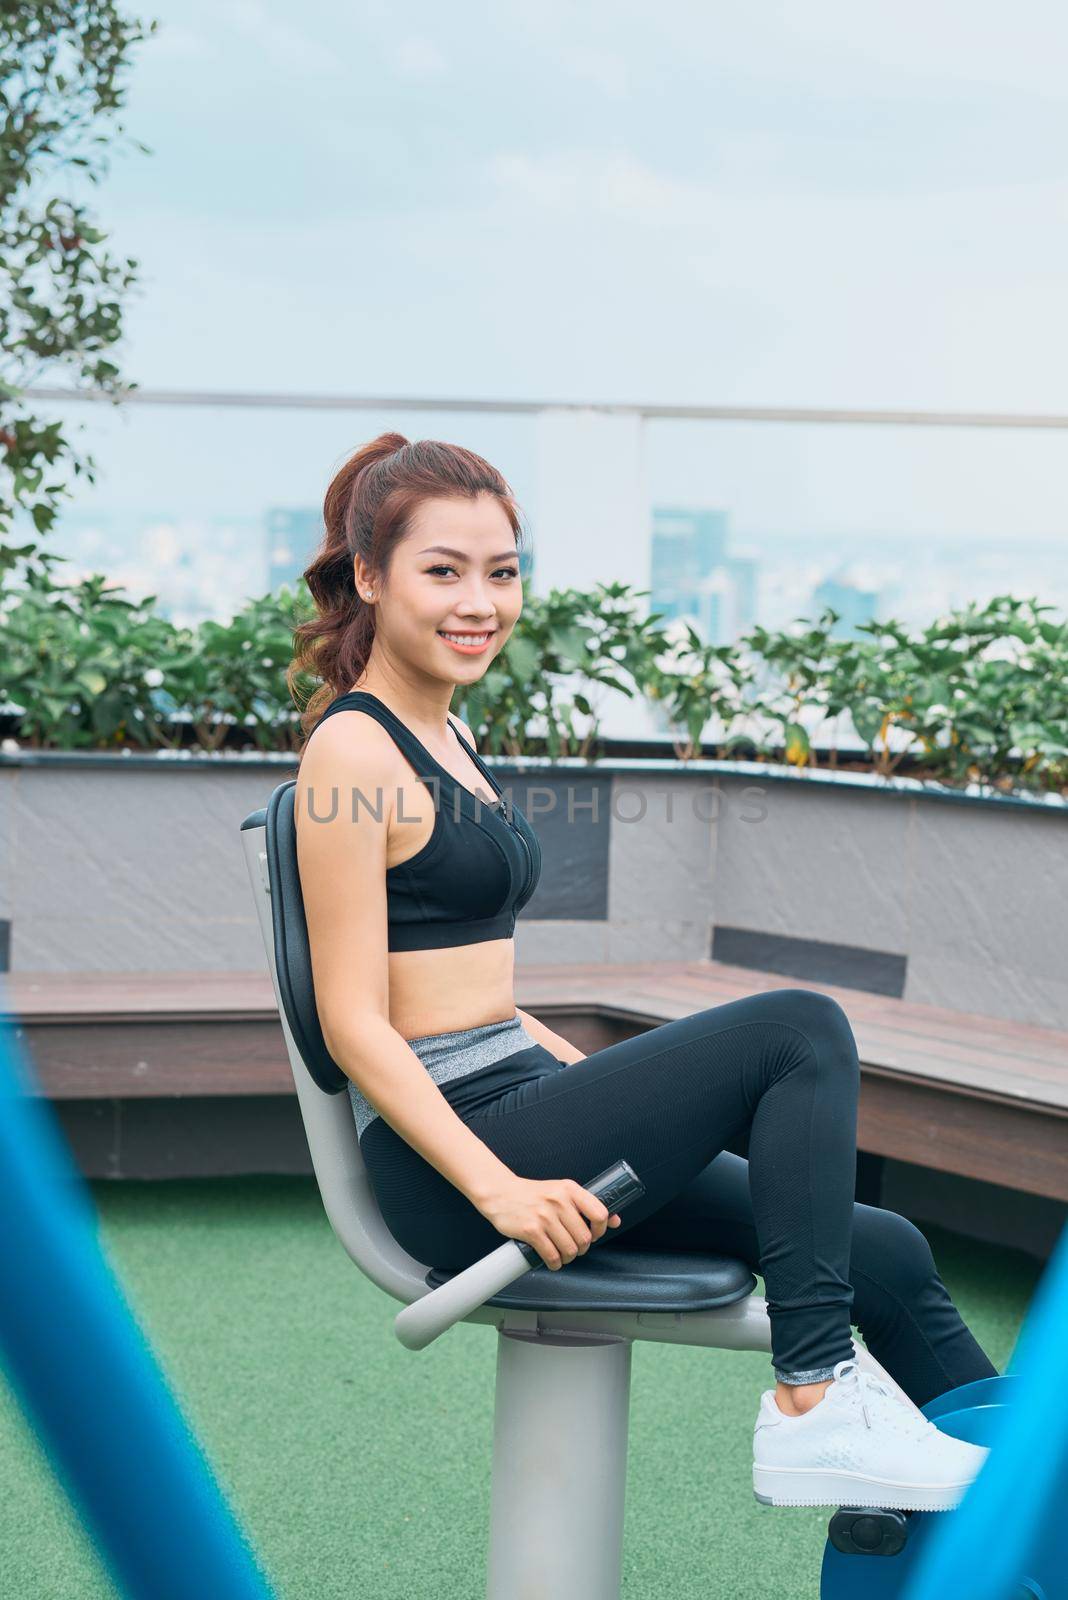 Asian woman exercising at outdoors gym playground equipment